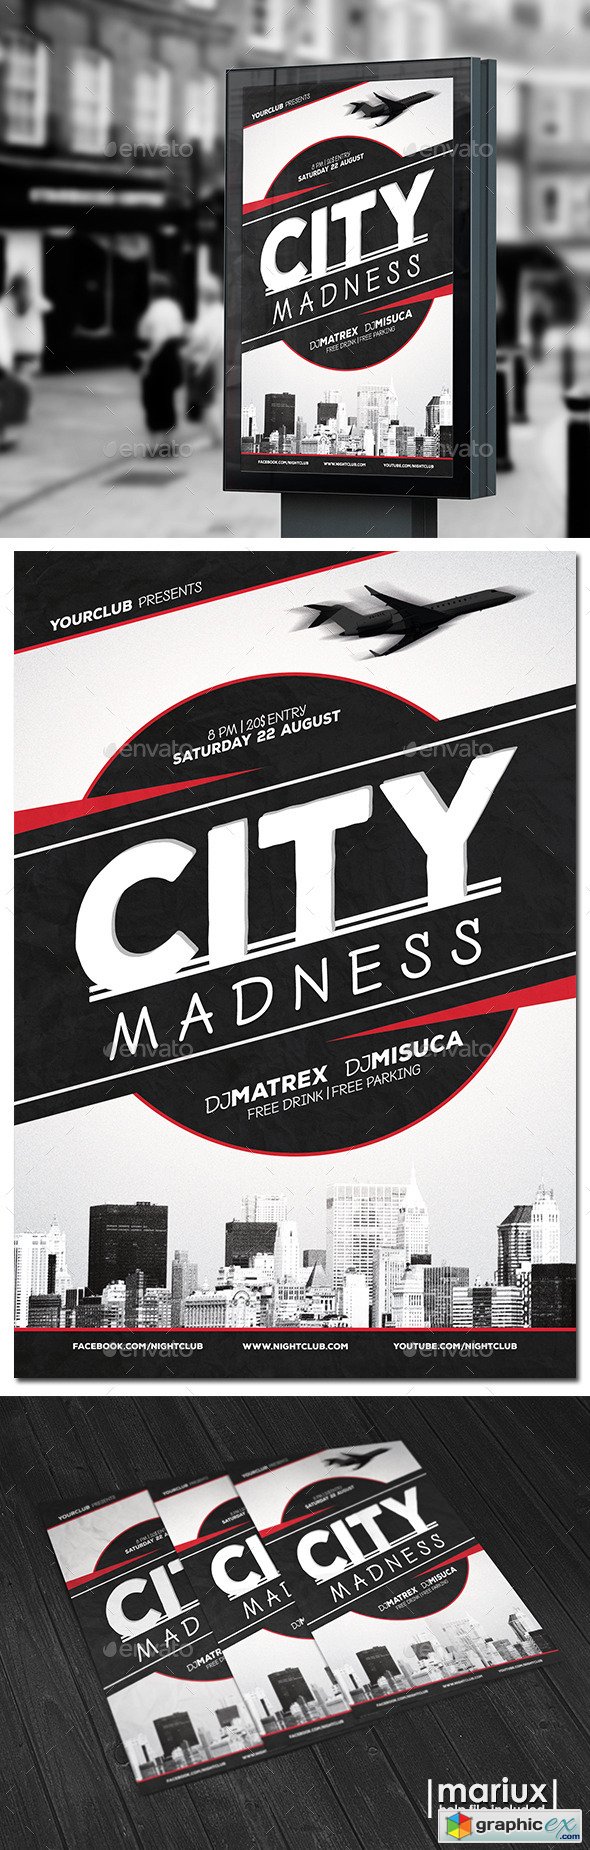 City Madness Party Flyer